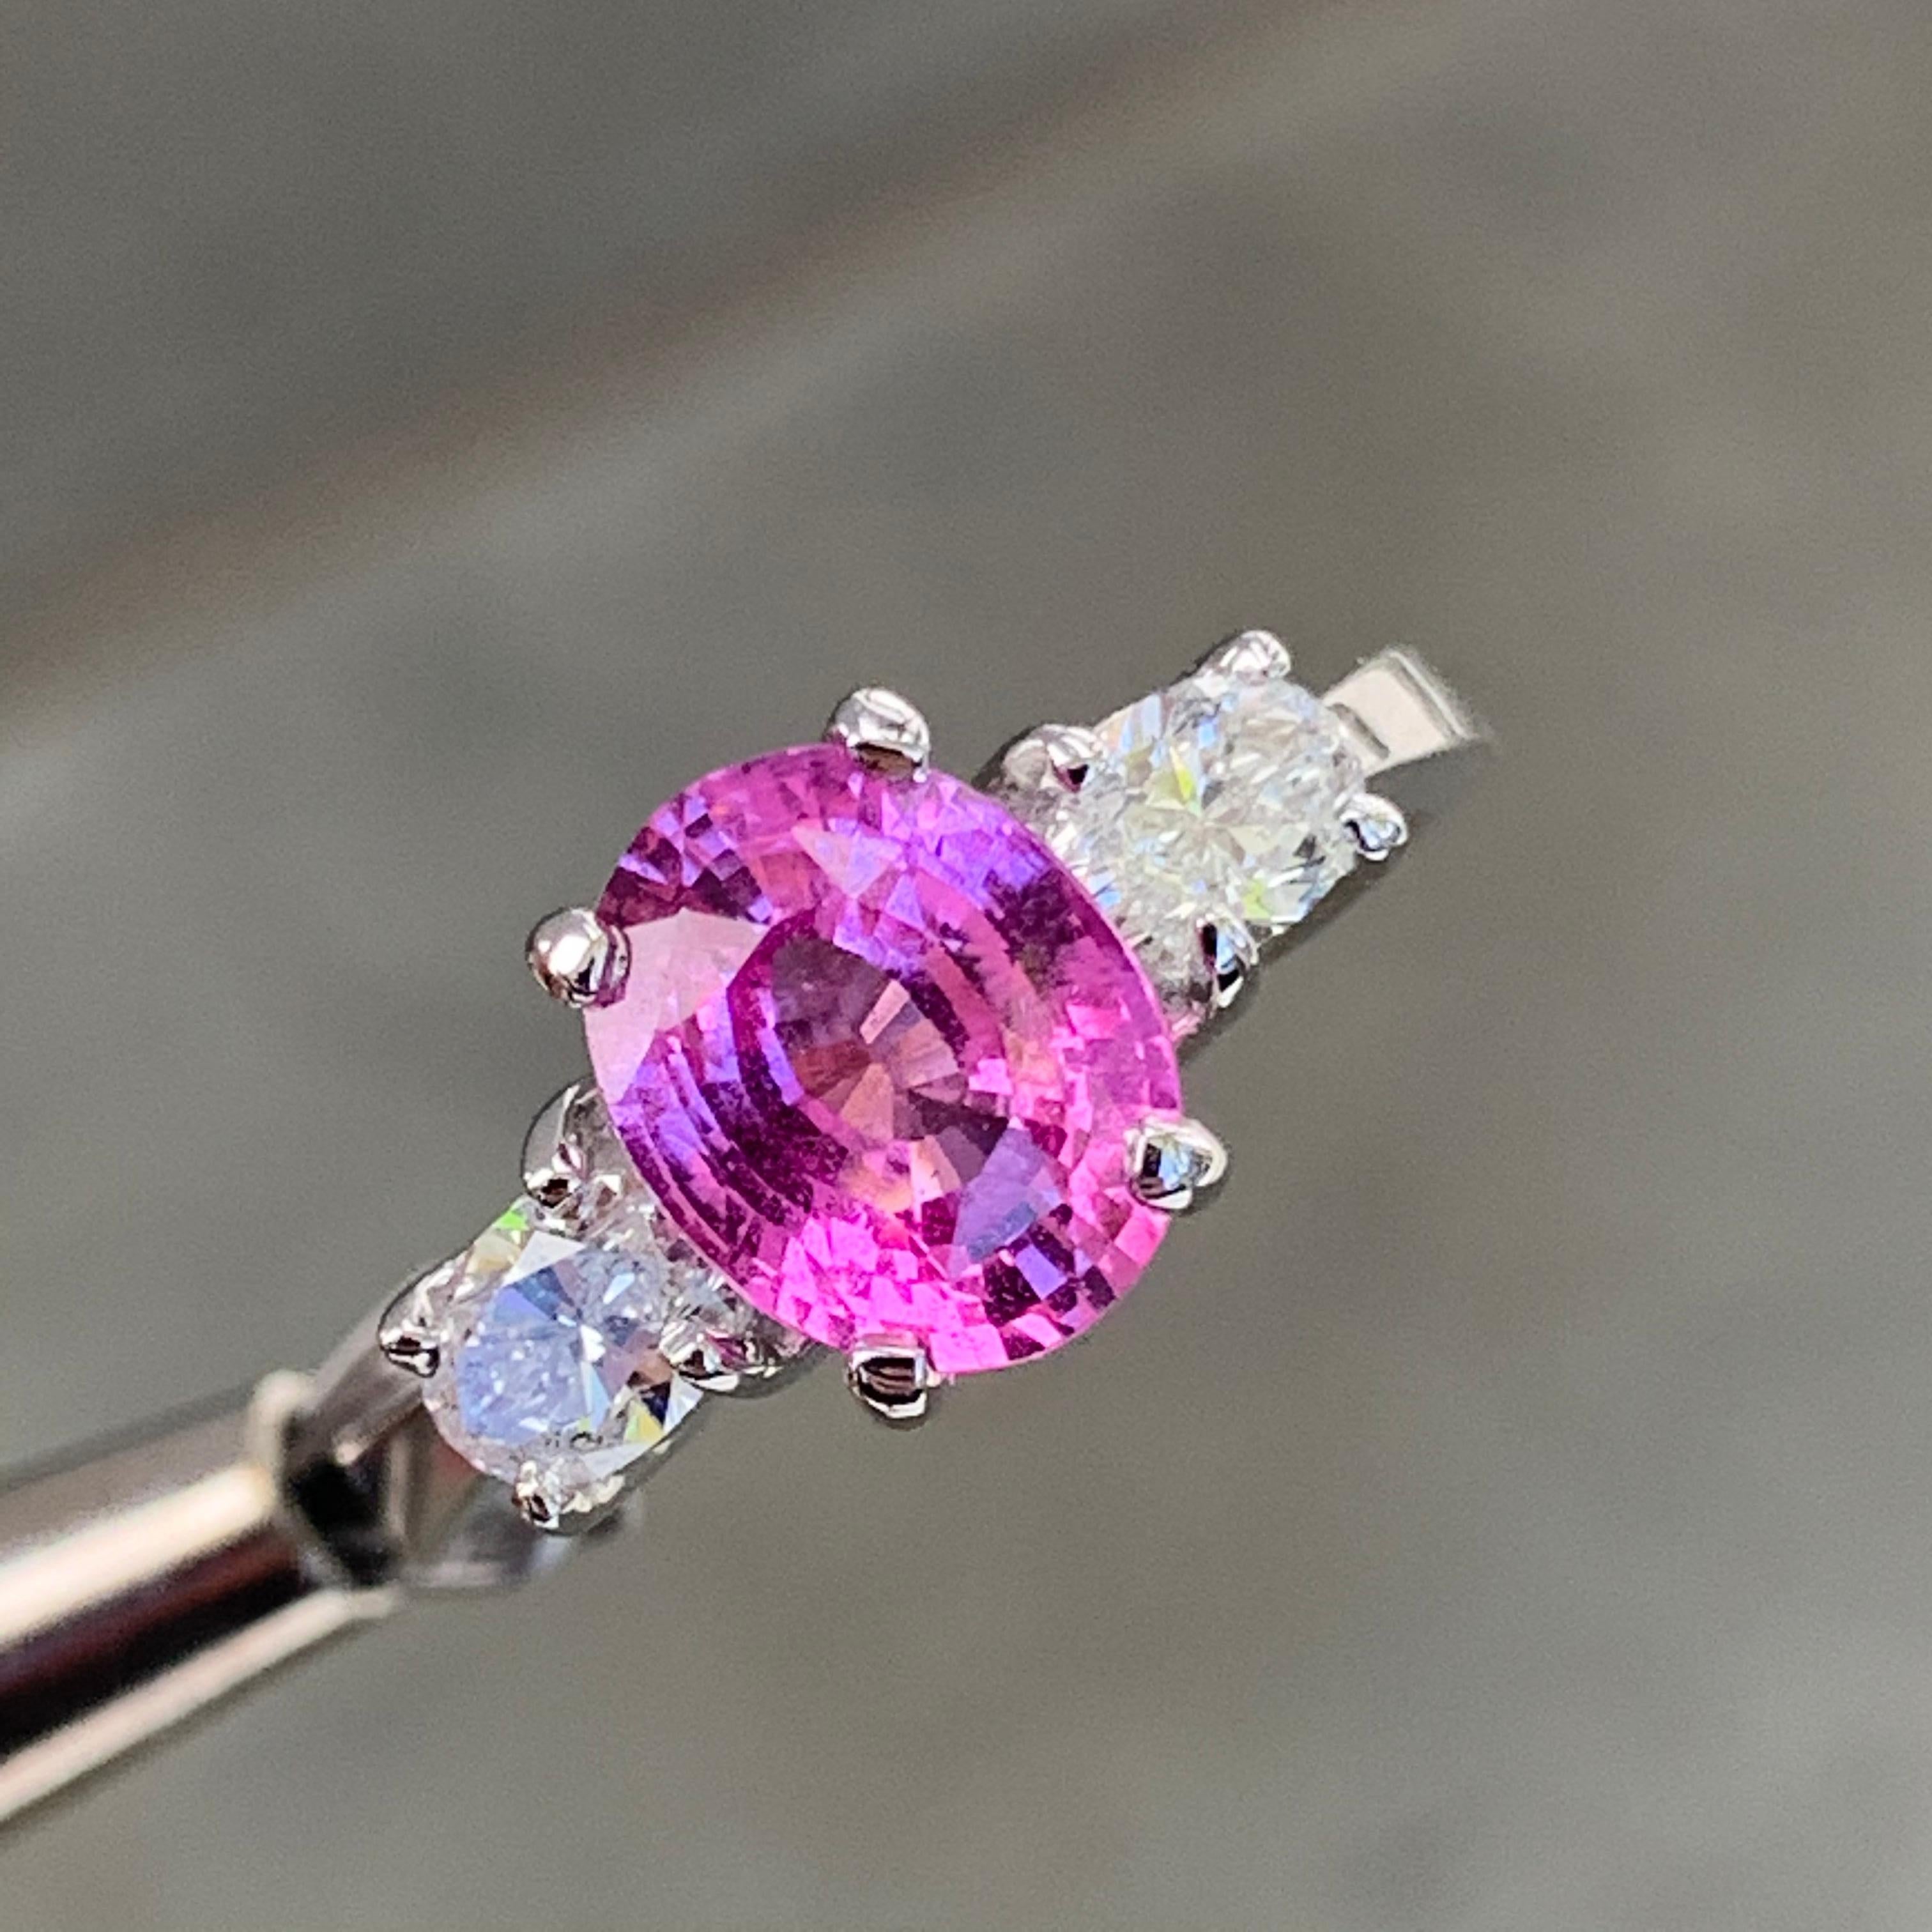 B8064003

If you like the setting but want to use your own stone or a less expensive one contact us through first dibs messaging. Ring will be made to order and take approximately 3-6 weeks

1. Carat Weight: 2.30

2. Color: Vivid Electric Pink

3.